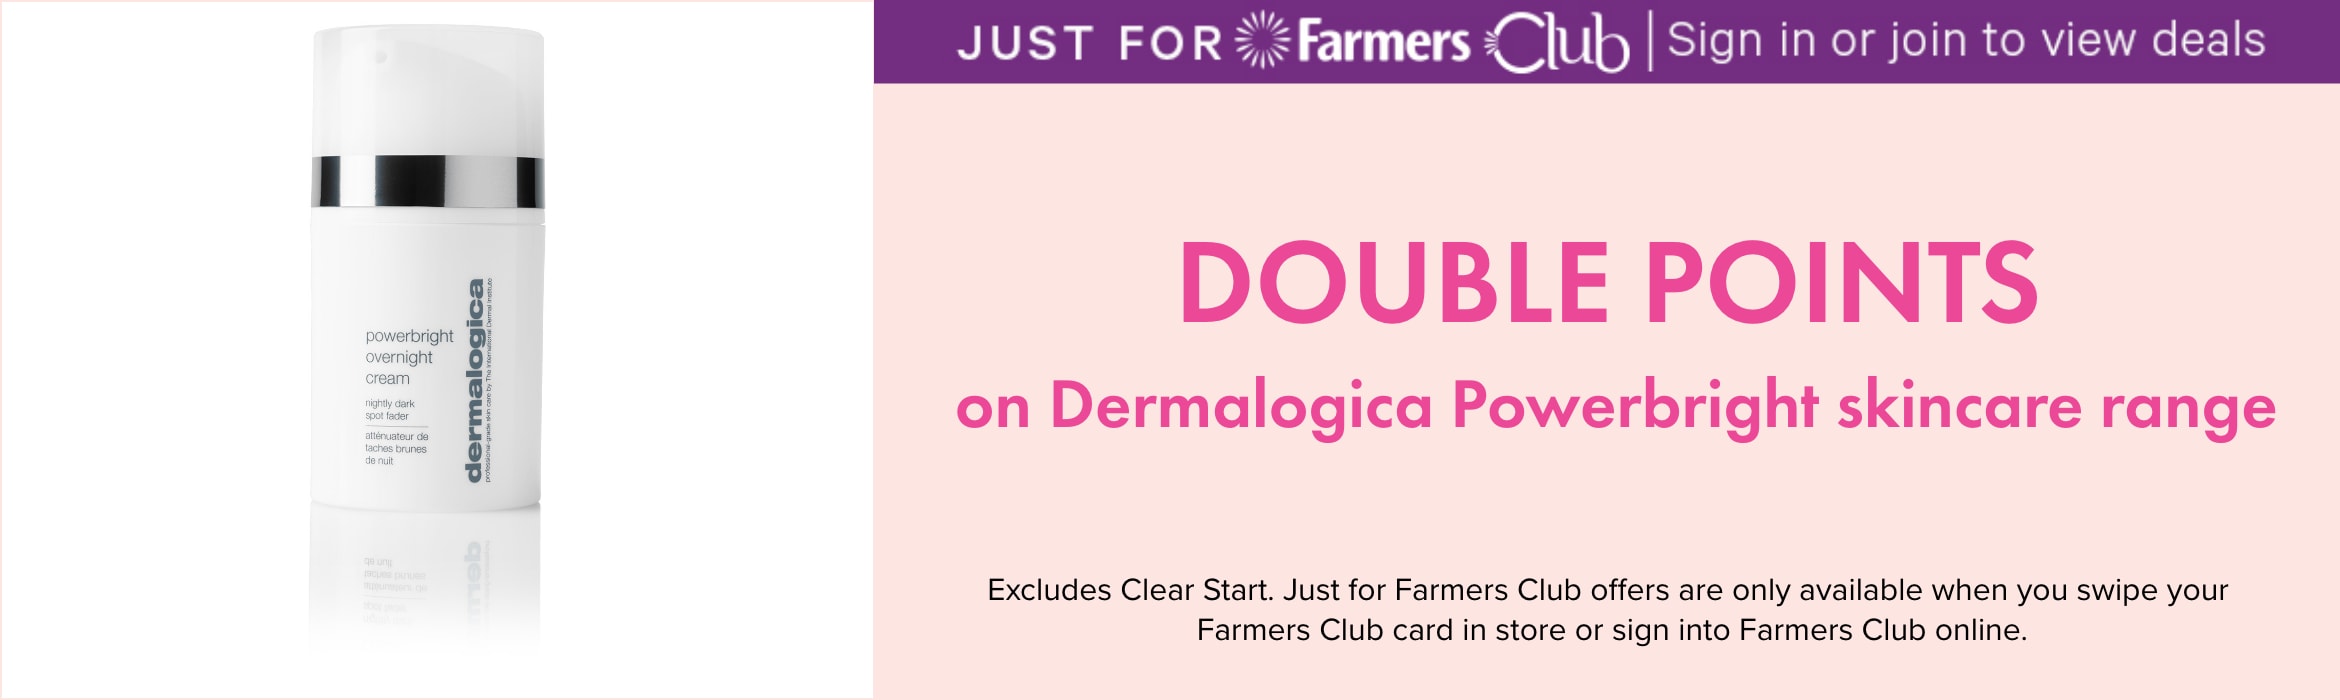 DOUBLE POINTS on Dermalogica Powerbright skincare range